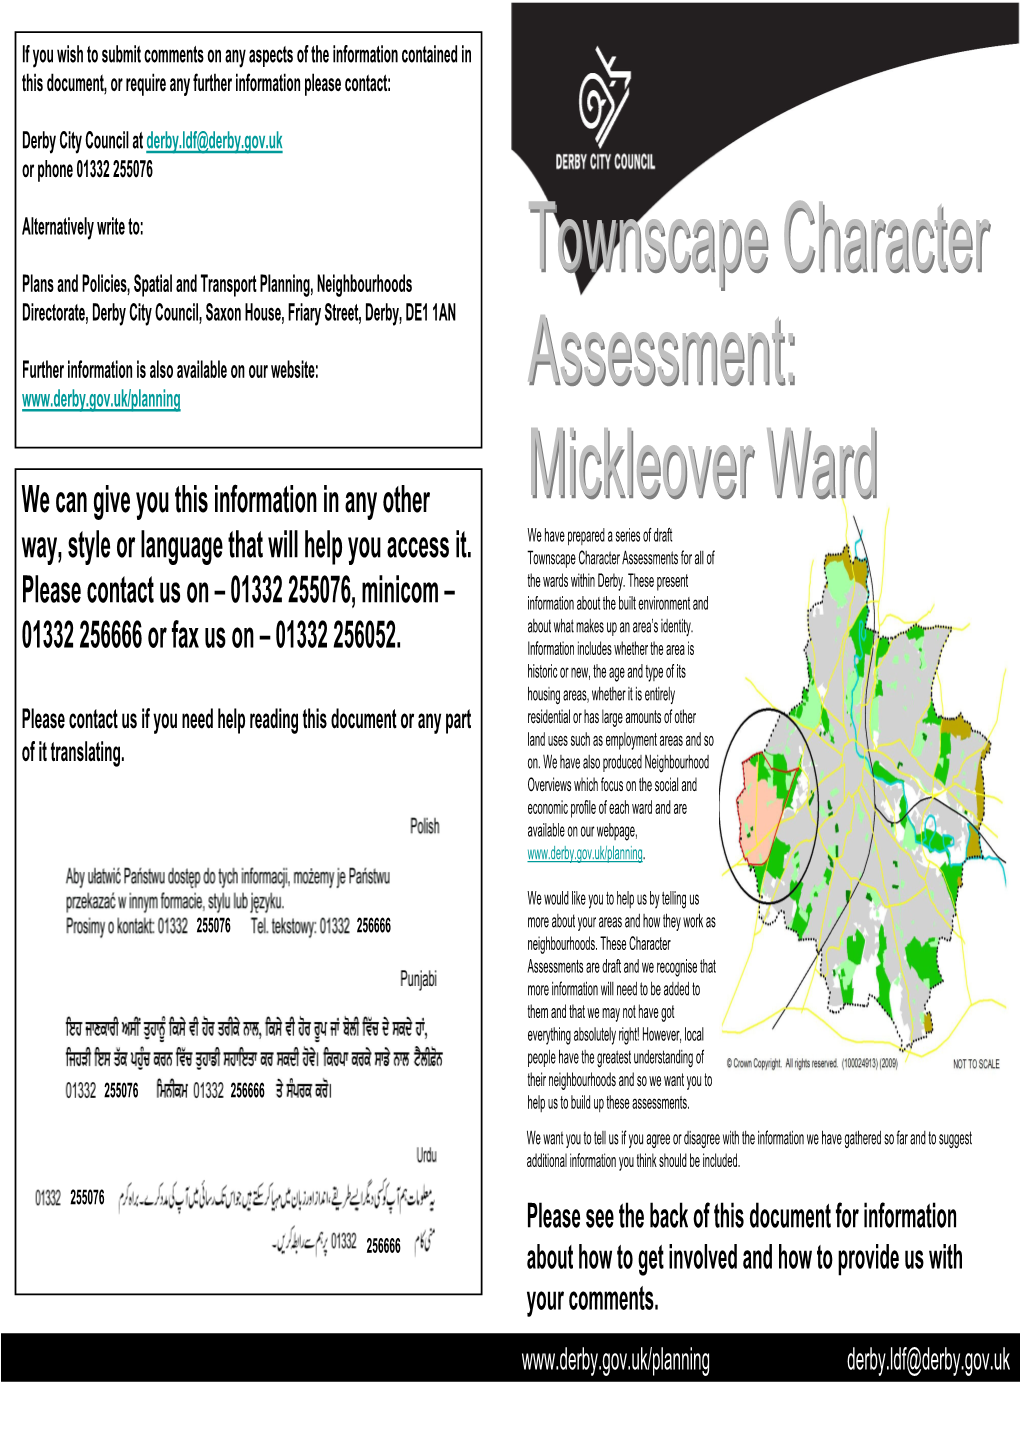 Mickleover Ward Townscape Character Assessment